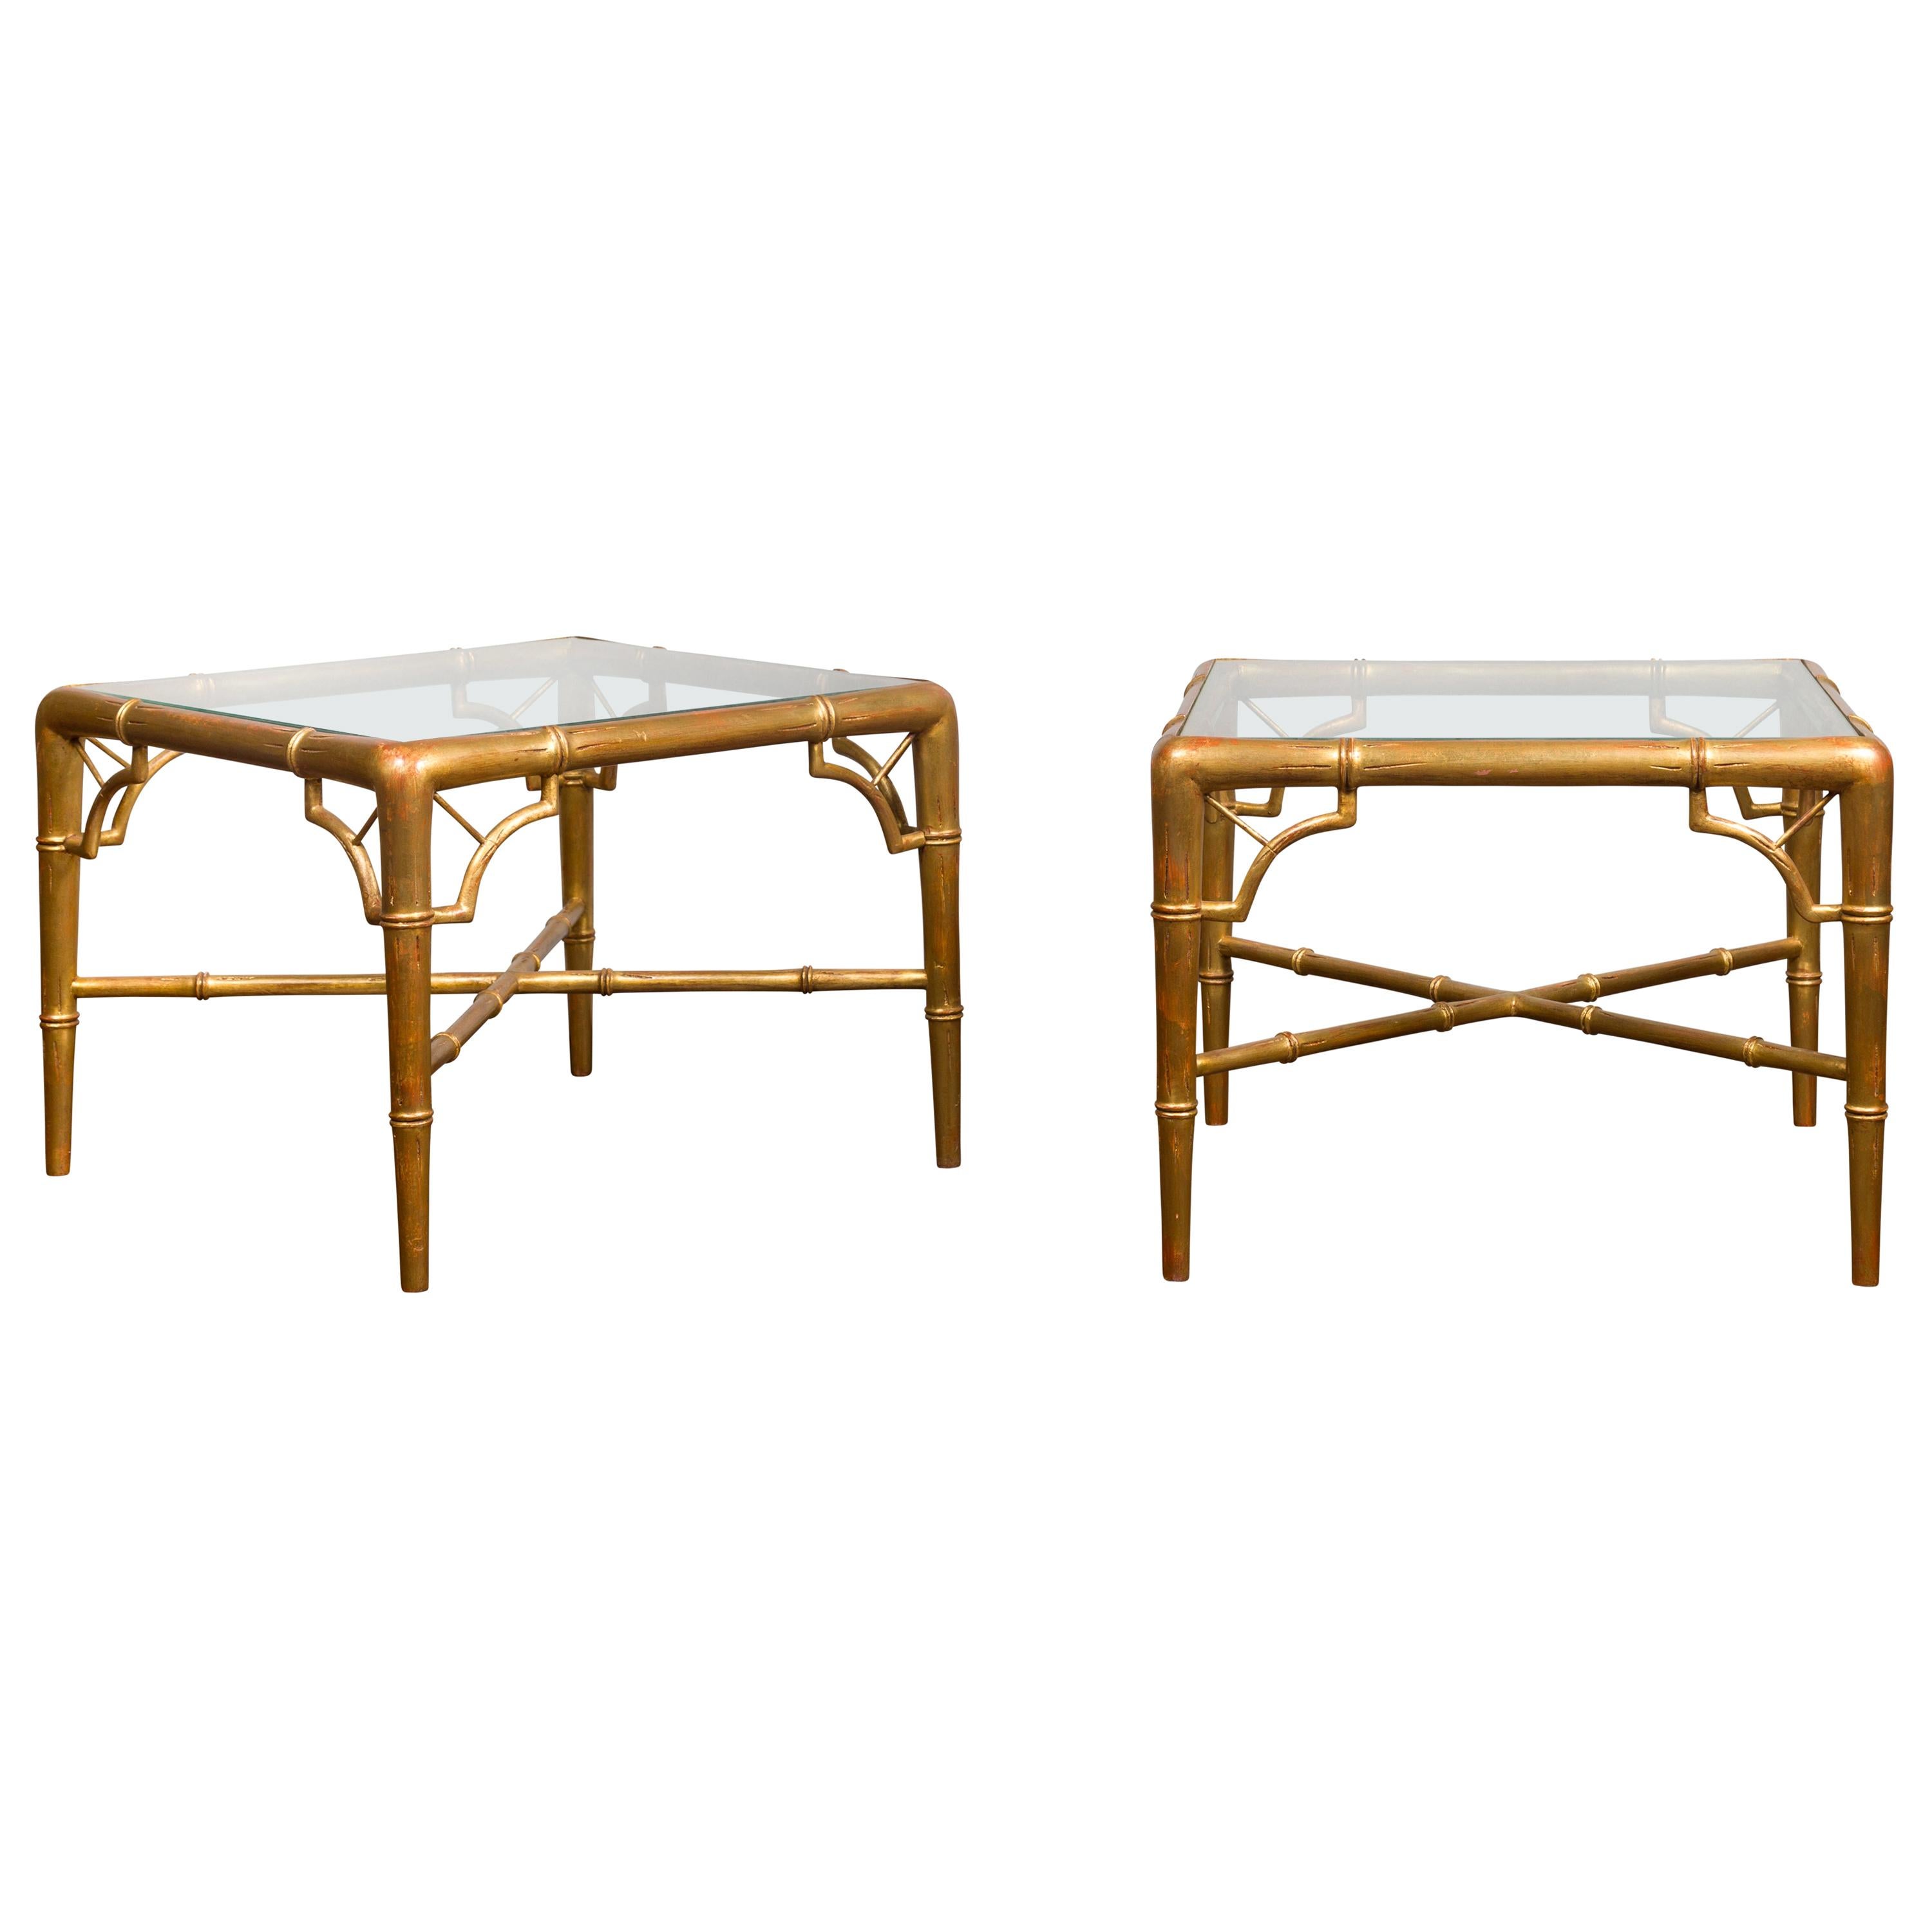 Pair of French Midcentury Gilt Faux Bamboo Drinks Tables with Glass Tops